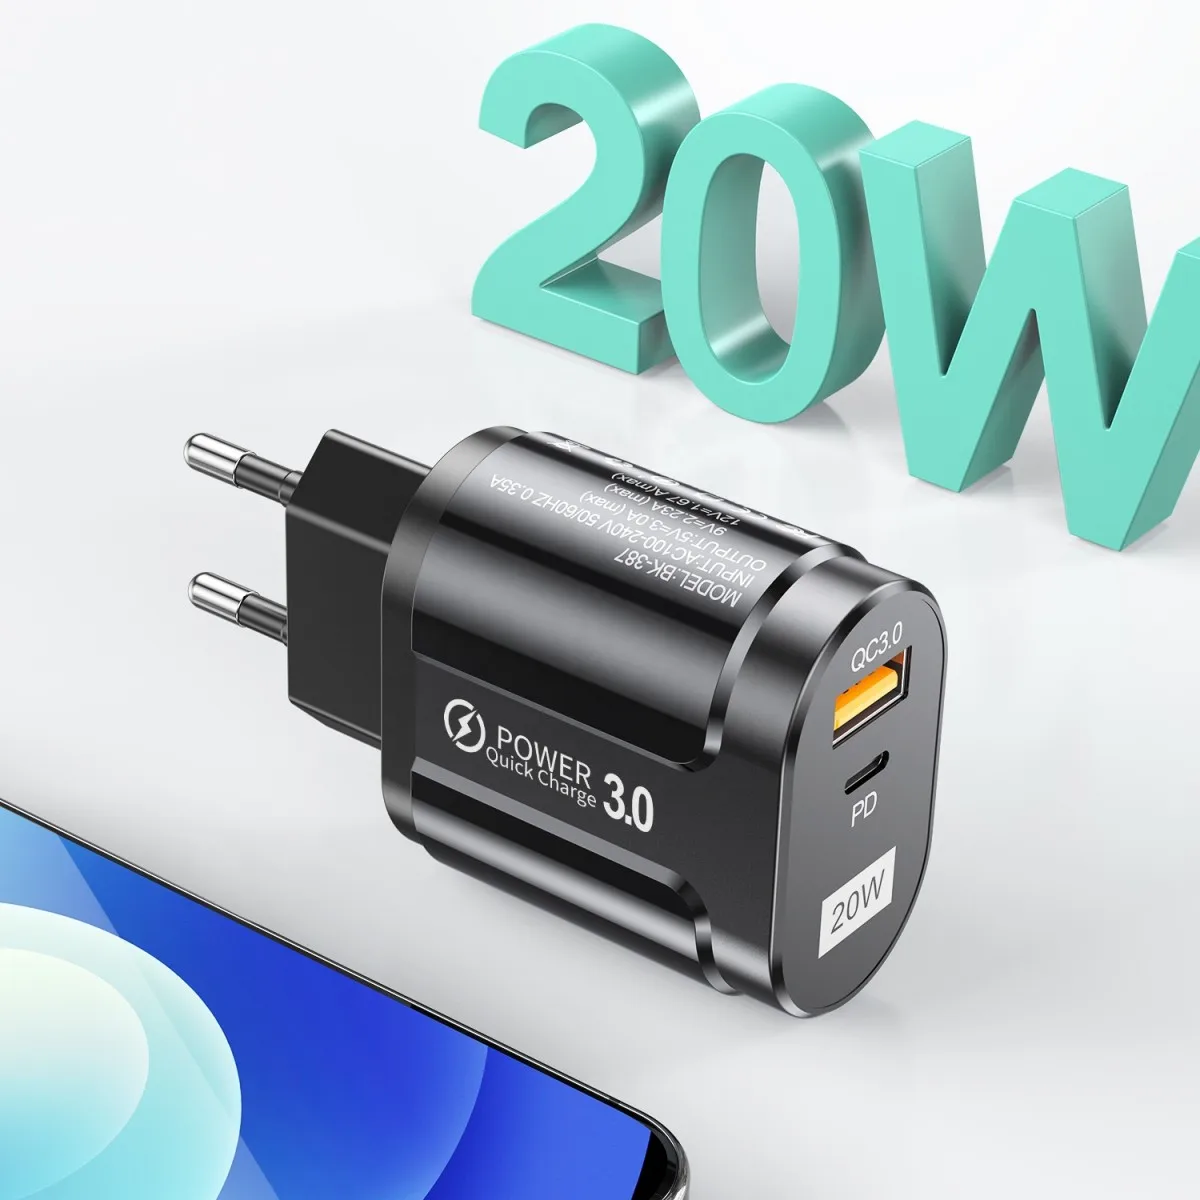 

2021 20W Quick Charger USB QC3.0 PD 3.0 Type-c Fast Charging Travel Wall Adapter Mobile Phone Charger EU US UK For iPhone